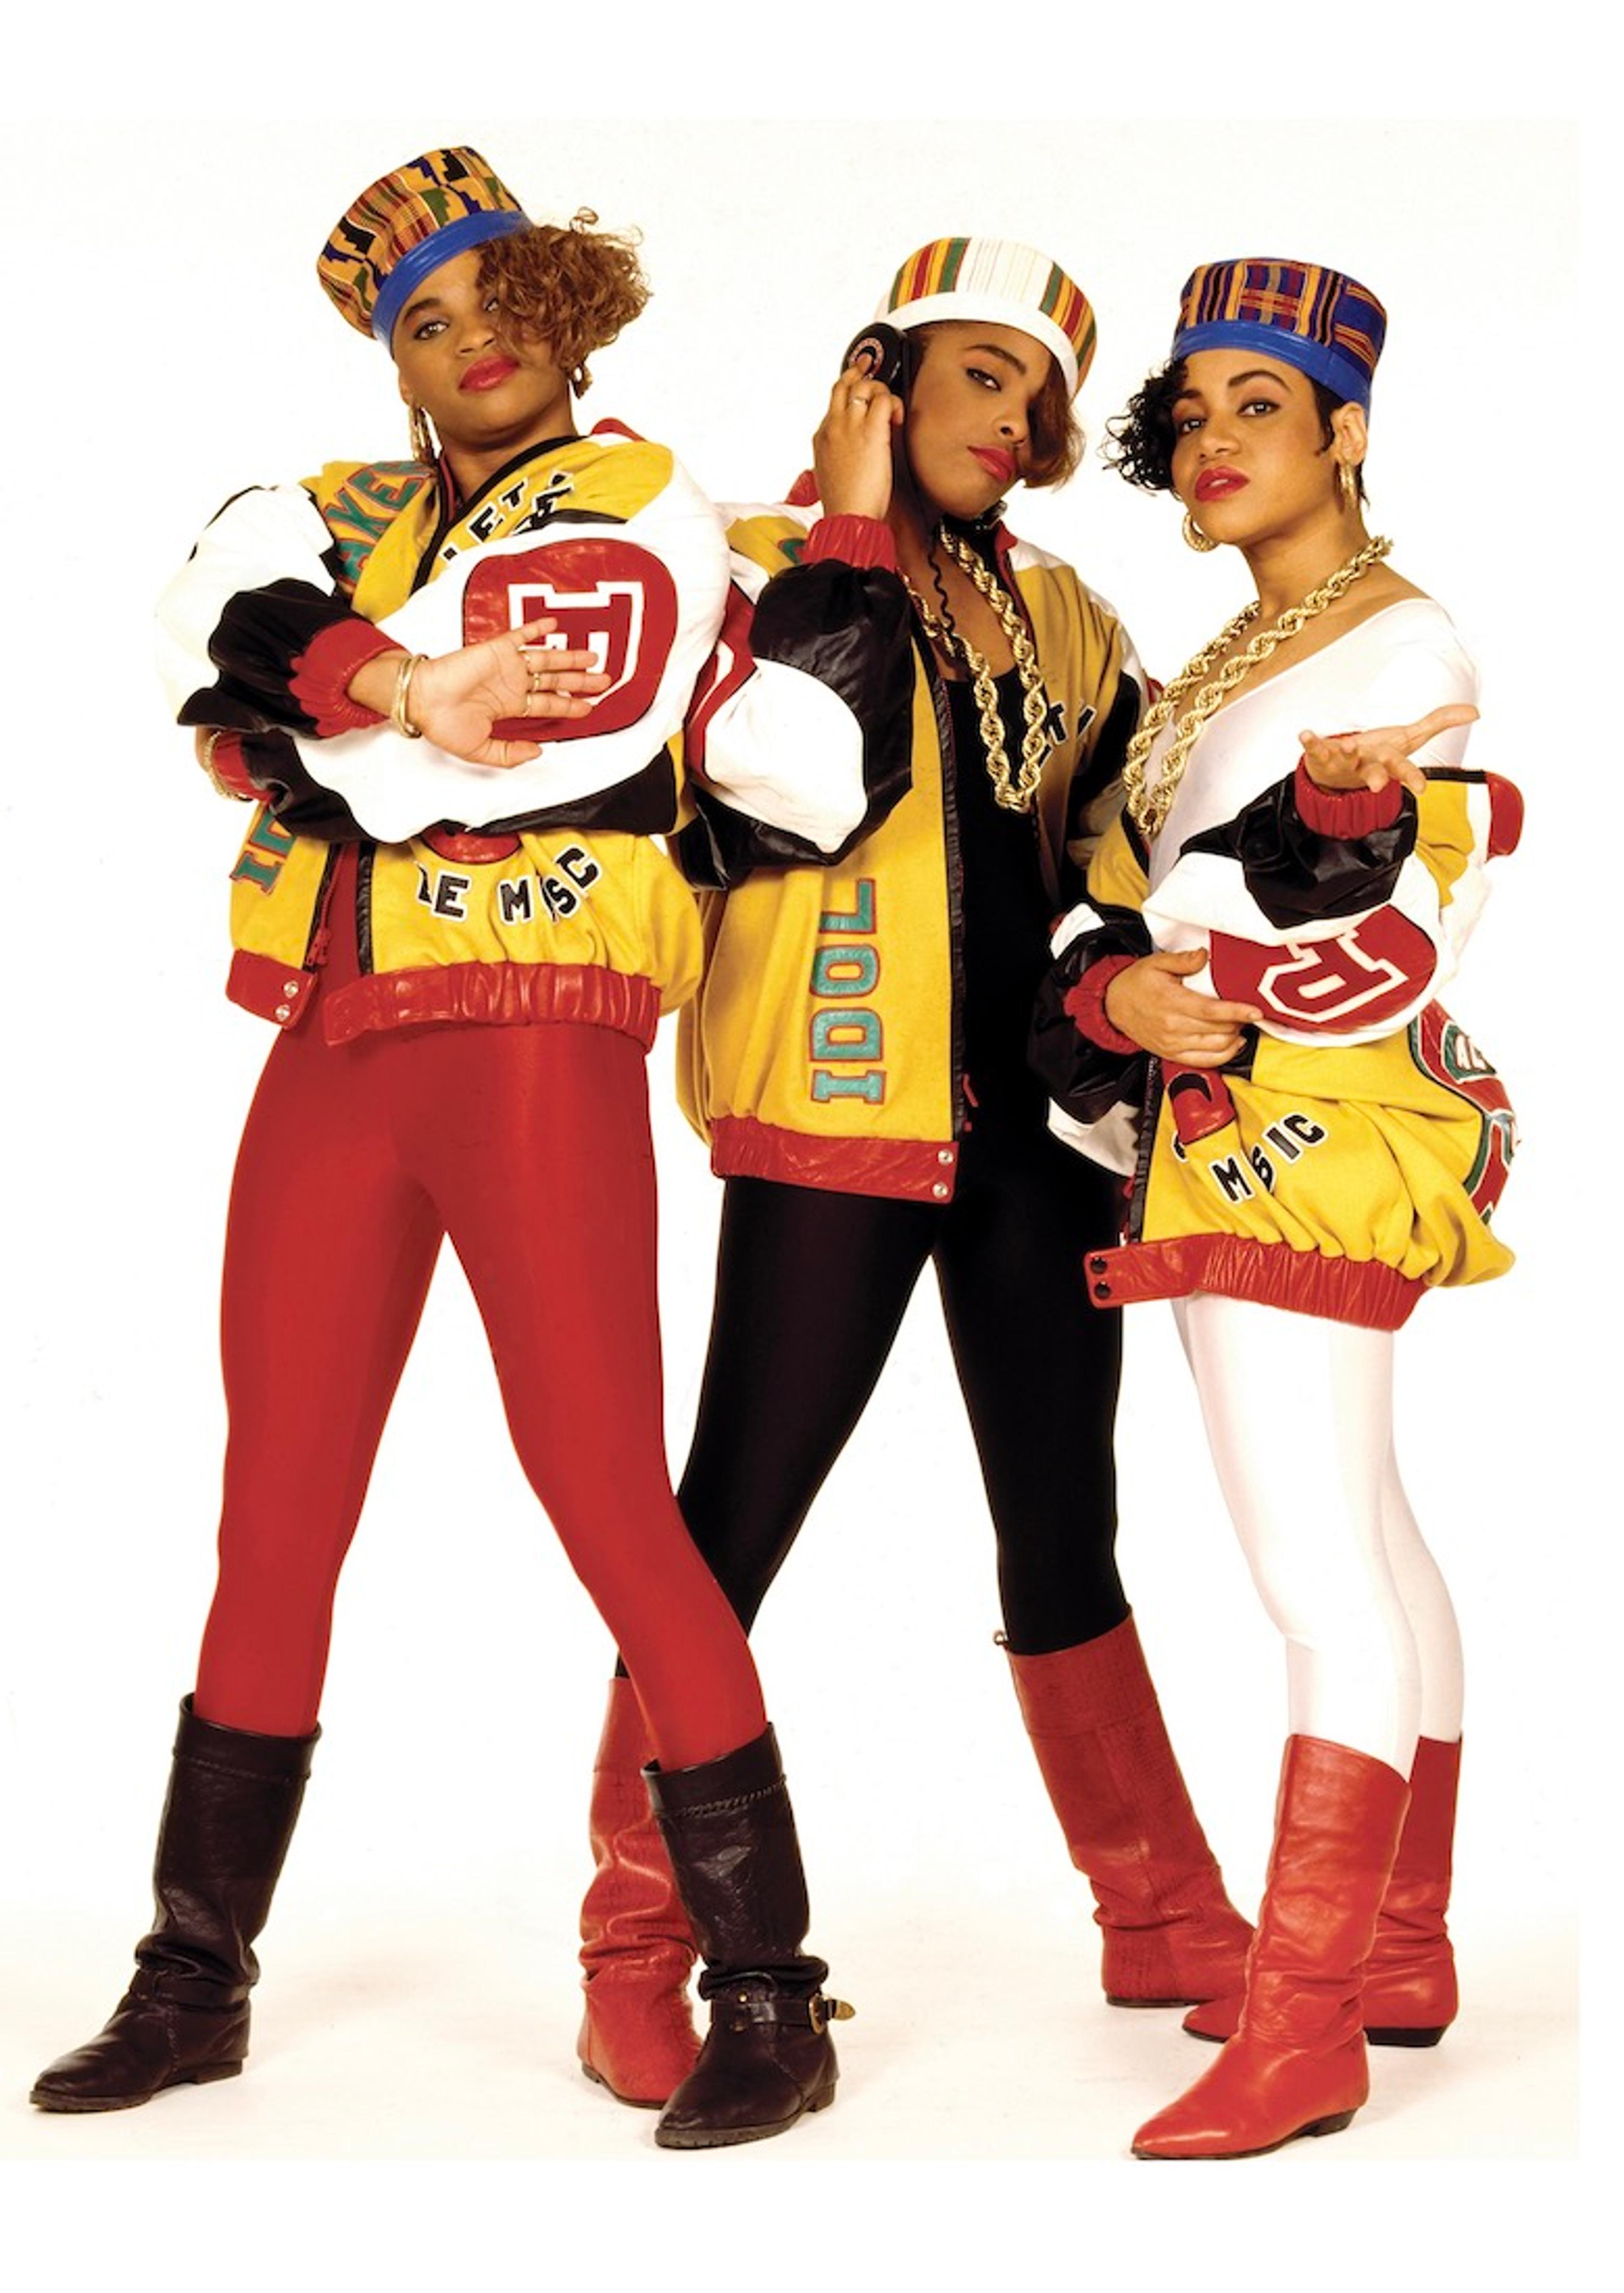 A photograph of the Salt-n-Pepa trio dressed in yellow and red outfits